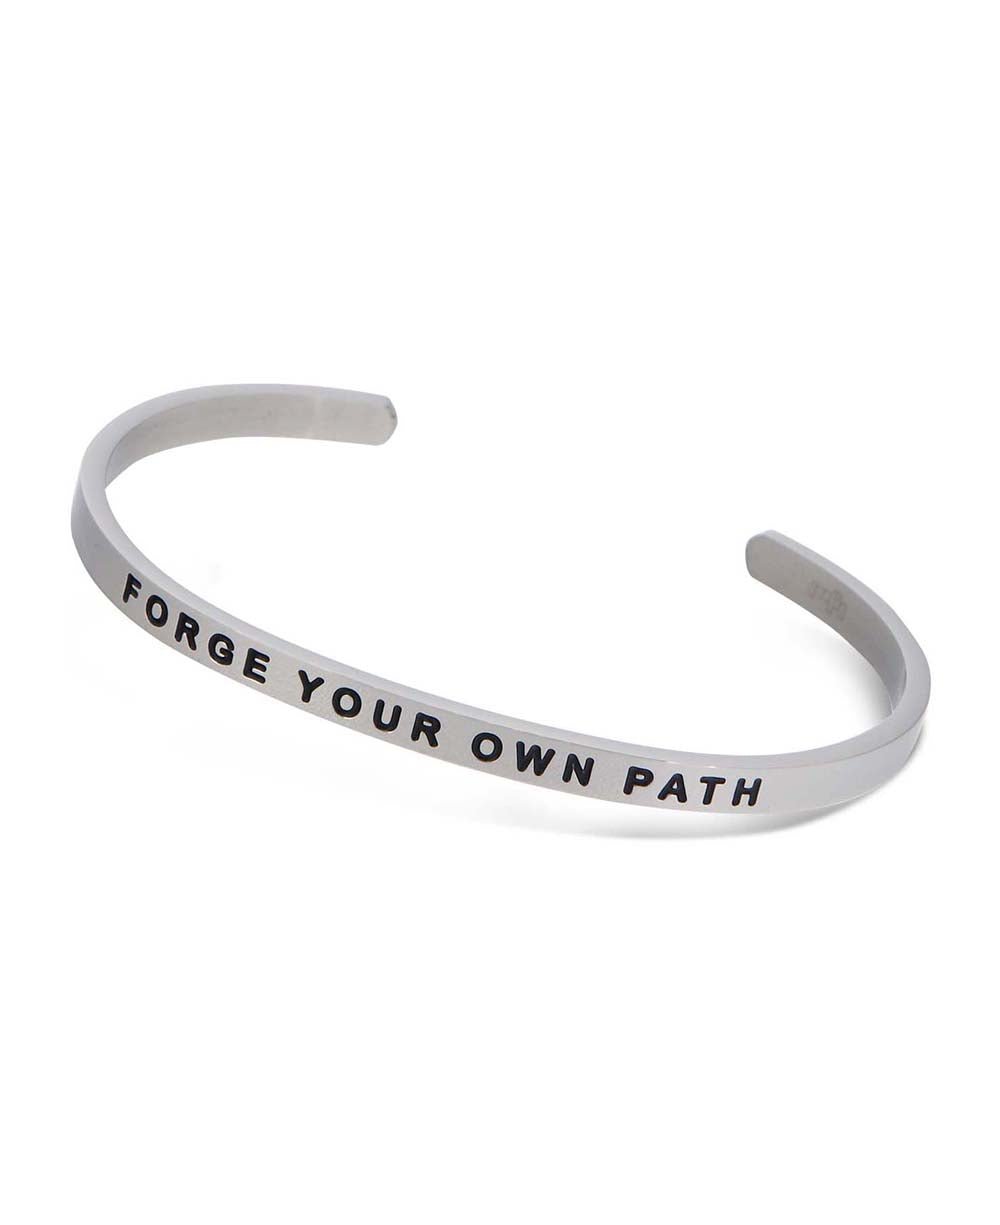 Forge Your Own Path Inspirational Cuff Bracelet - Bracelets